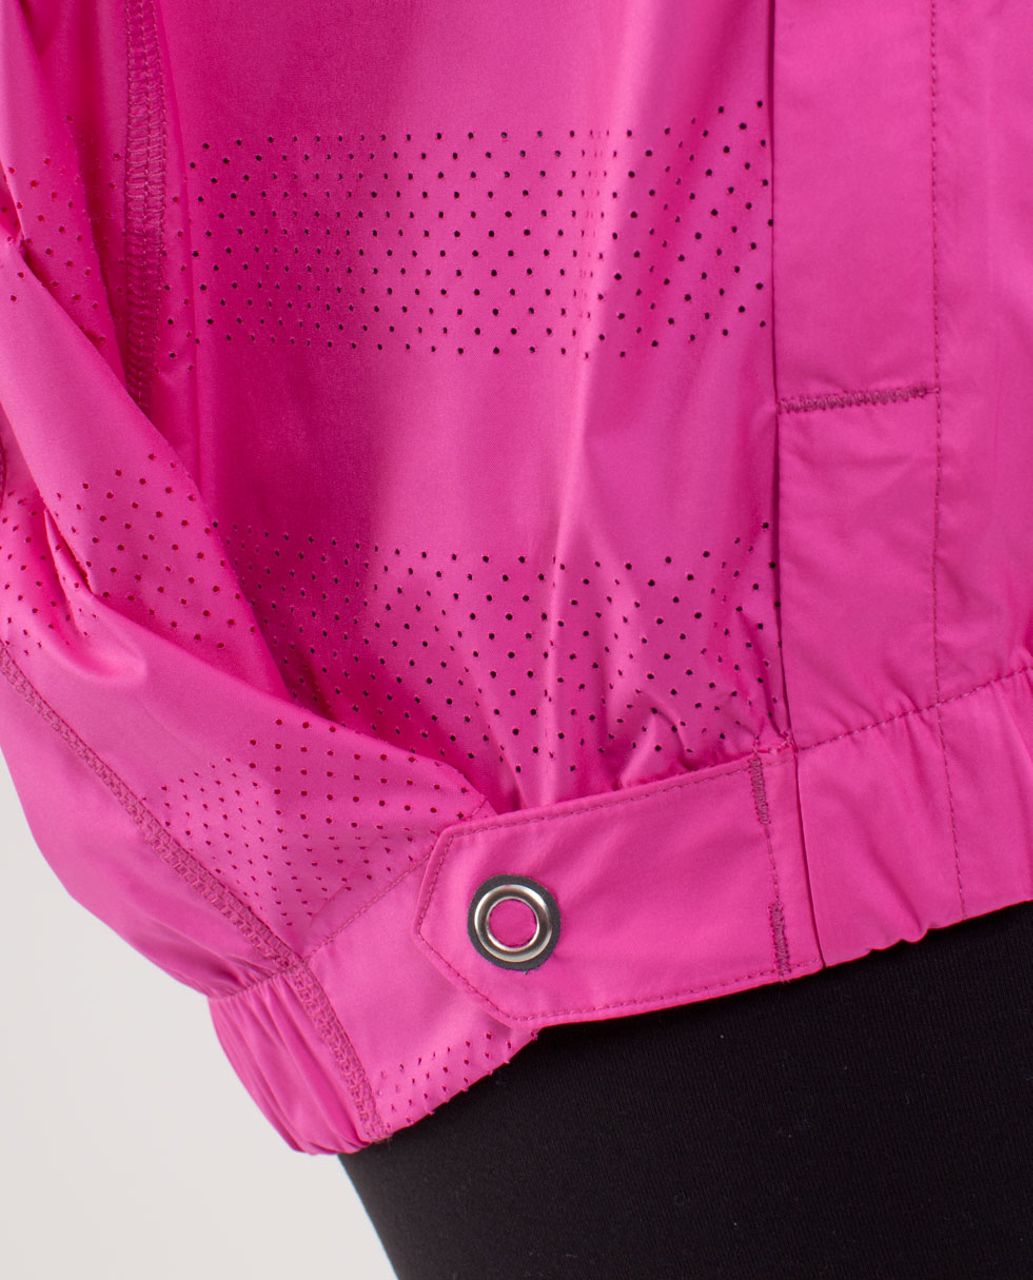 Lululemon Pack and Go Pullover - Paris Pink